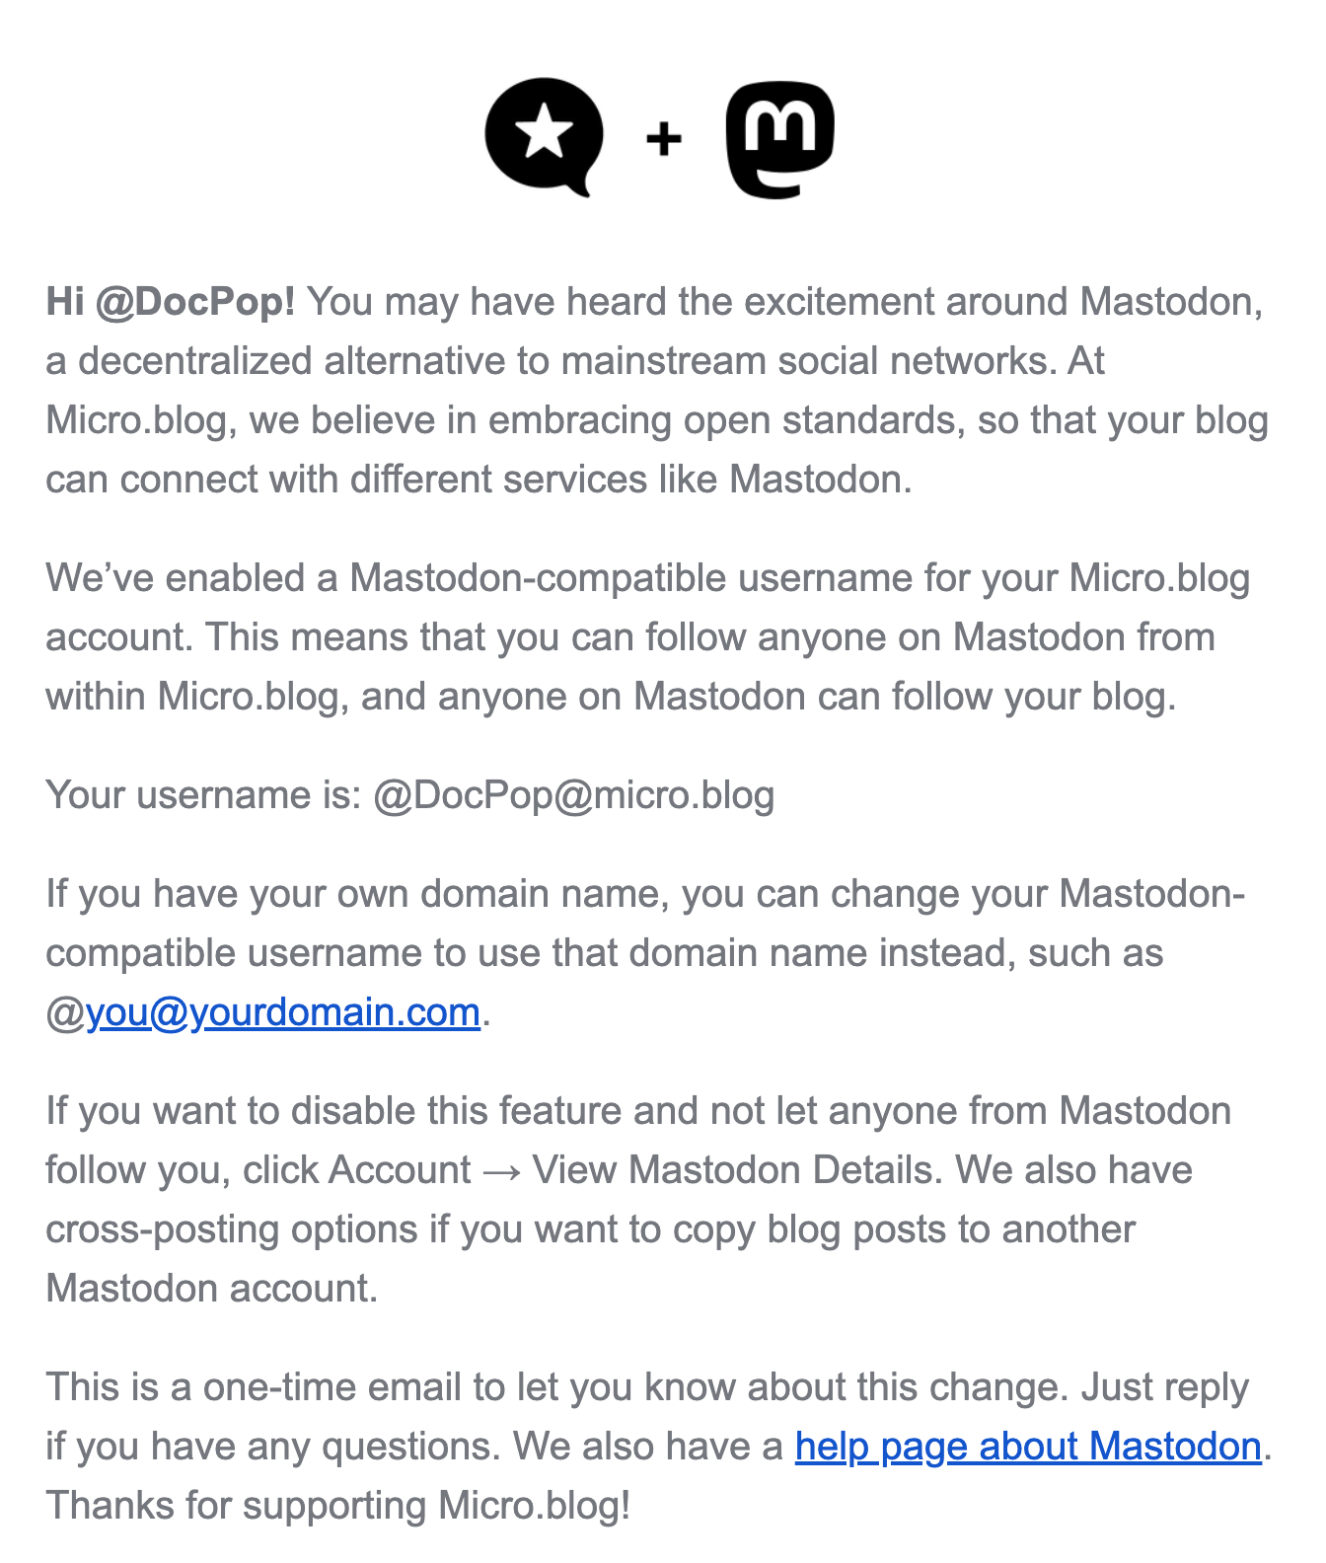 "Hi @DocPop! You may have heard the excitement around Mastodon, a decentralized alternative to mainstream social networks. At Micro.blog, we believe in embracing open standards, so that your blog can connect with different services like Mastodon. We’ve <br />enabled a Mastodon-compatible username for your Micro.blog account. This means that you can follow anyone on Mastodon from within Micro.blog, and anyone on Mastodon can follow your blog. Your username is: @DocPop@micro.blog If you have your own domain <br />name, you can change your Mastodon-compatible username to use that domain name instead, such as @you@yourdomain.com. If you want to disable this feature and not let anyone from Mastodon follow you, click Account → View Mastodon Details. We also have <br />cross-posting options if you want to copy blog posts to another Mastodon account. This is a one-time email to let you know about this change. Just reply if you have any questions. We also have a help page about Mastodon. Thanks for supporting Micro.blog!"